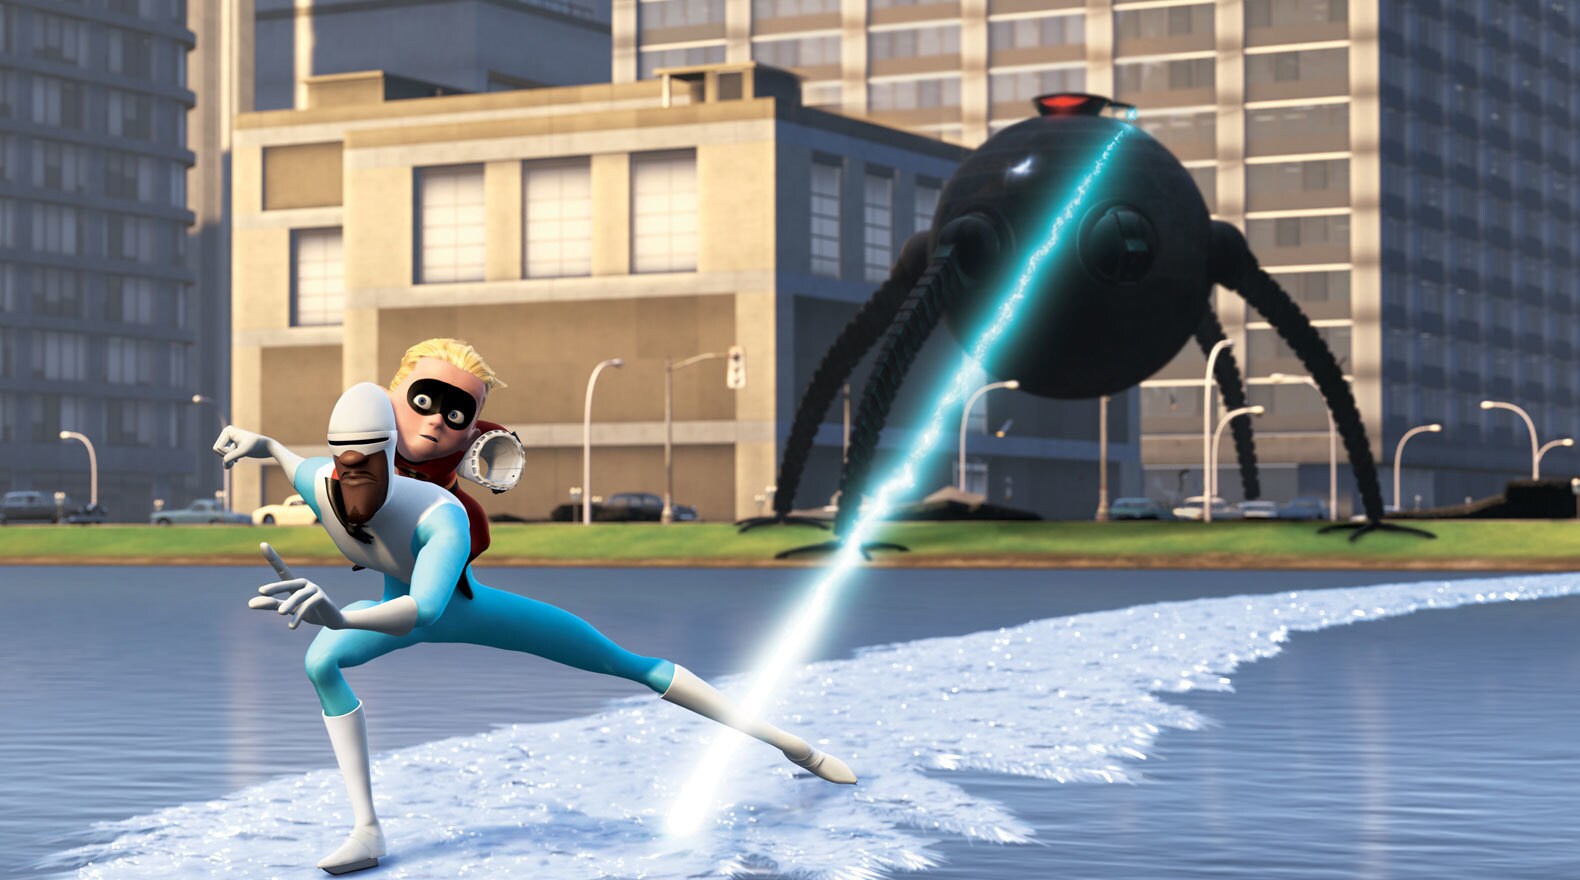 Frozone uses his icy powers to stall the Omnidroid in "The Incredibles"